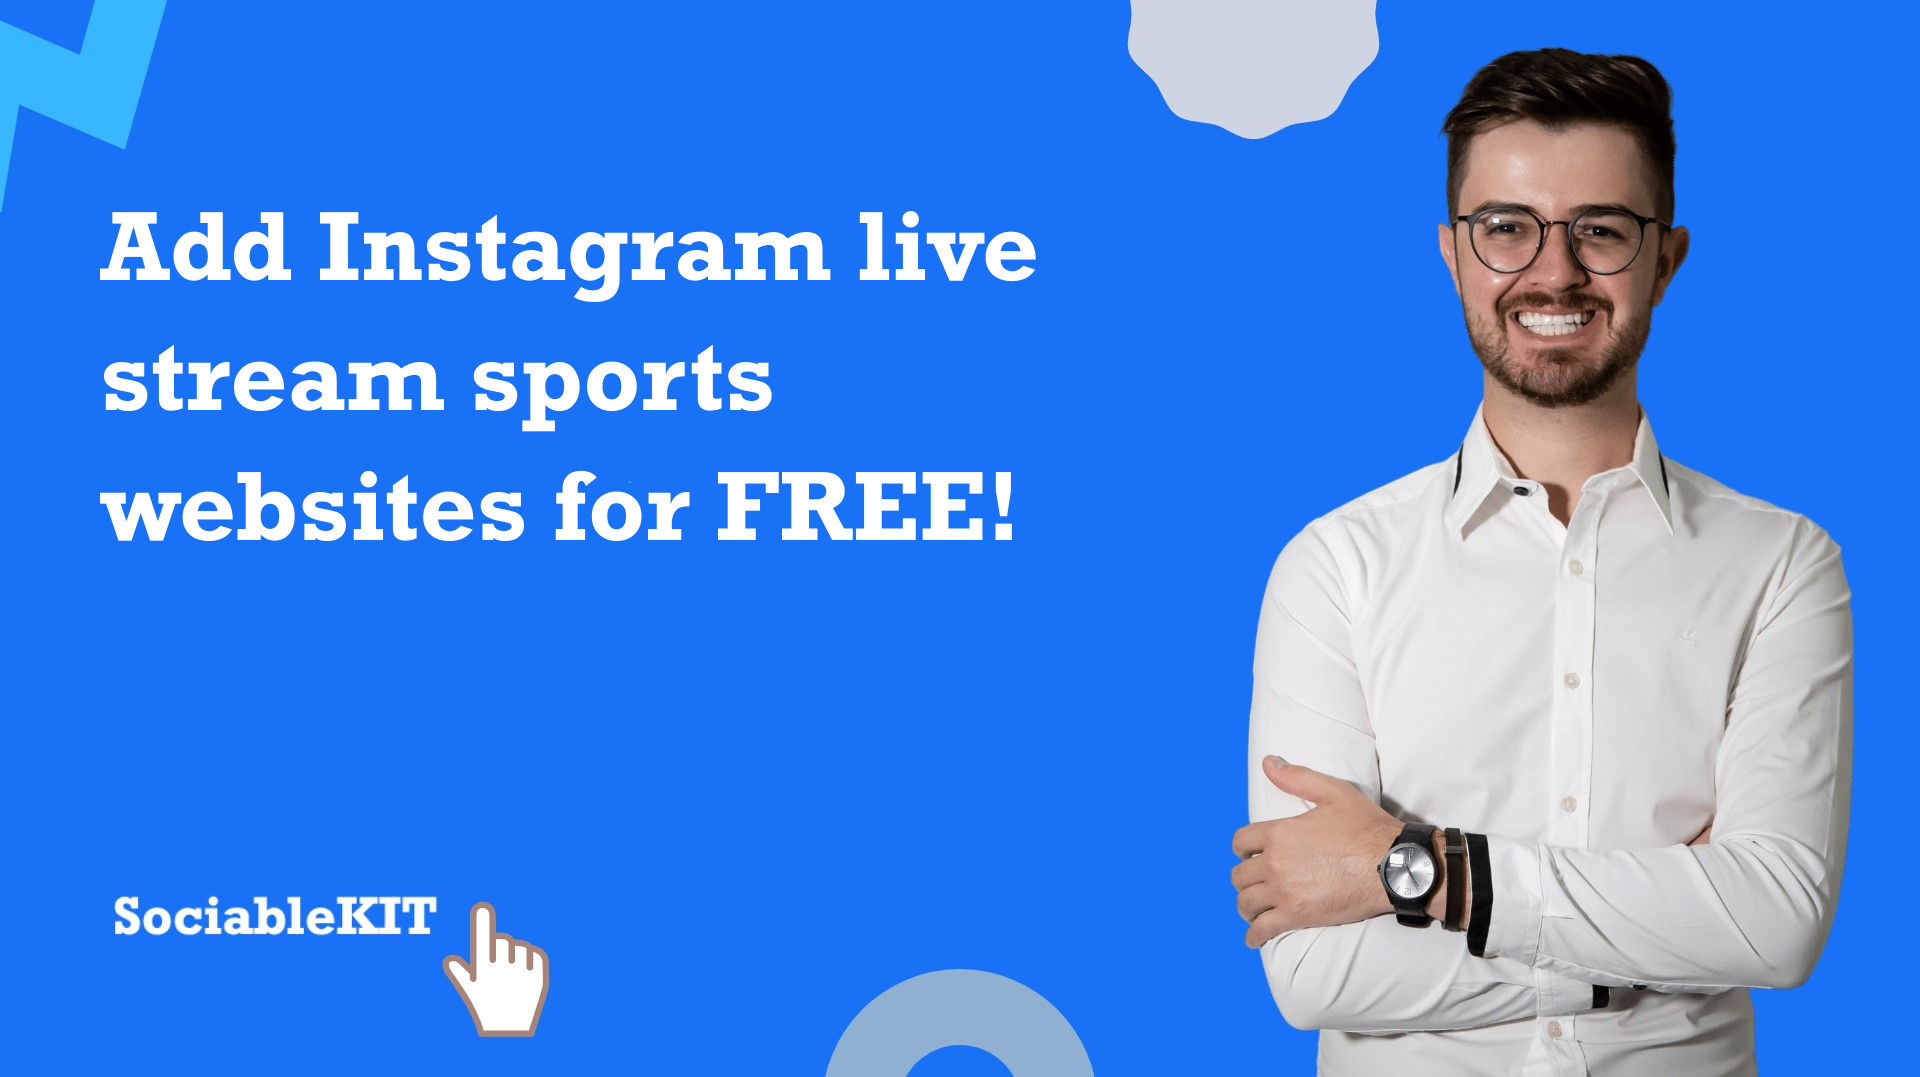 How to add Instagram live stream sports websites for FREE?